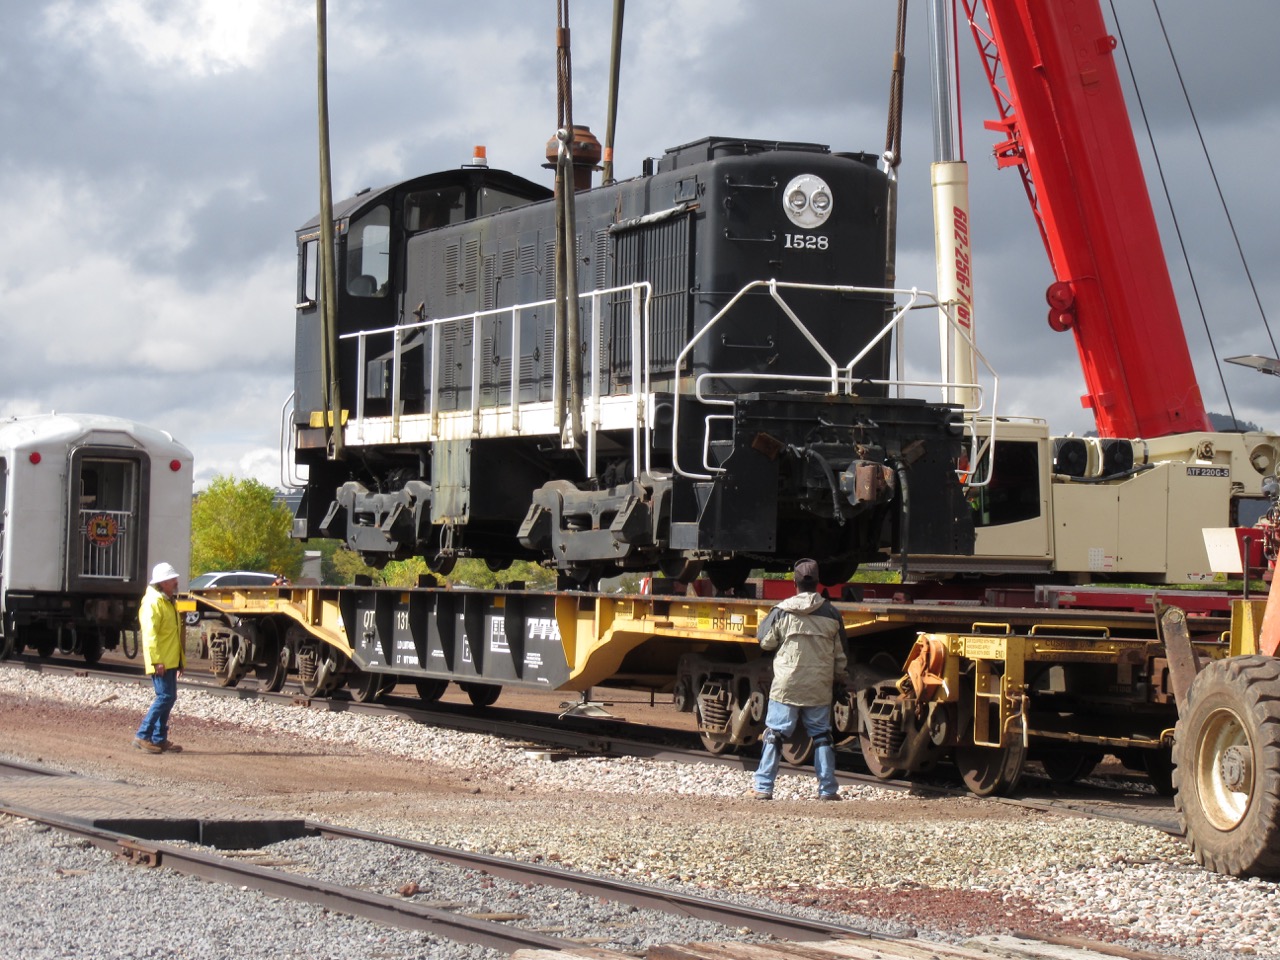  Railroad Museum continues collection for future opening 